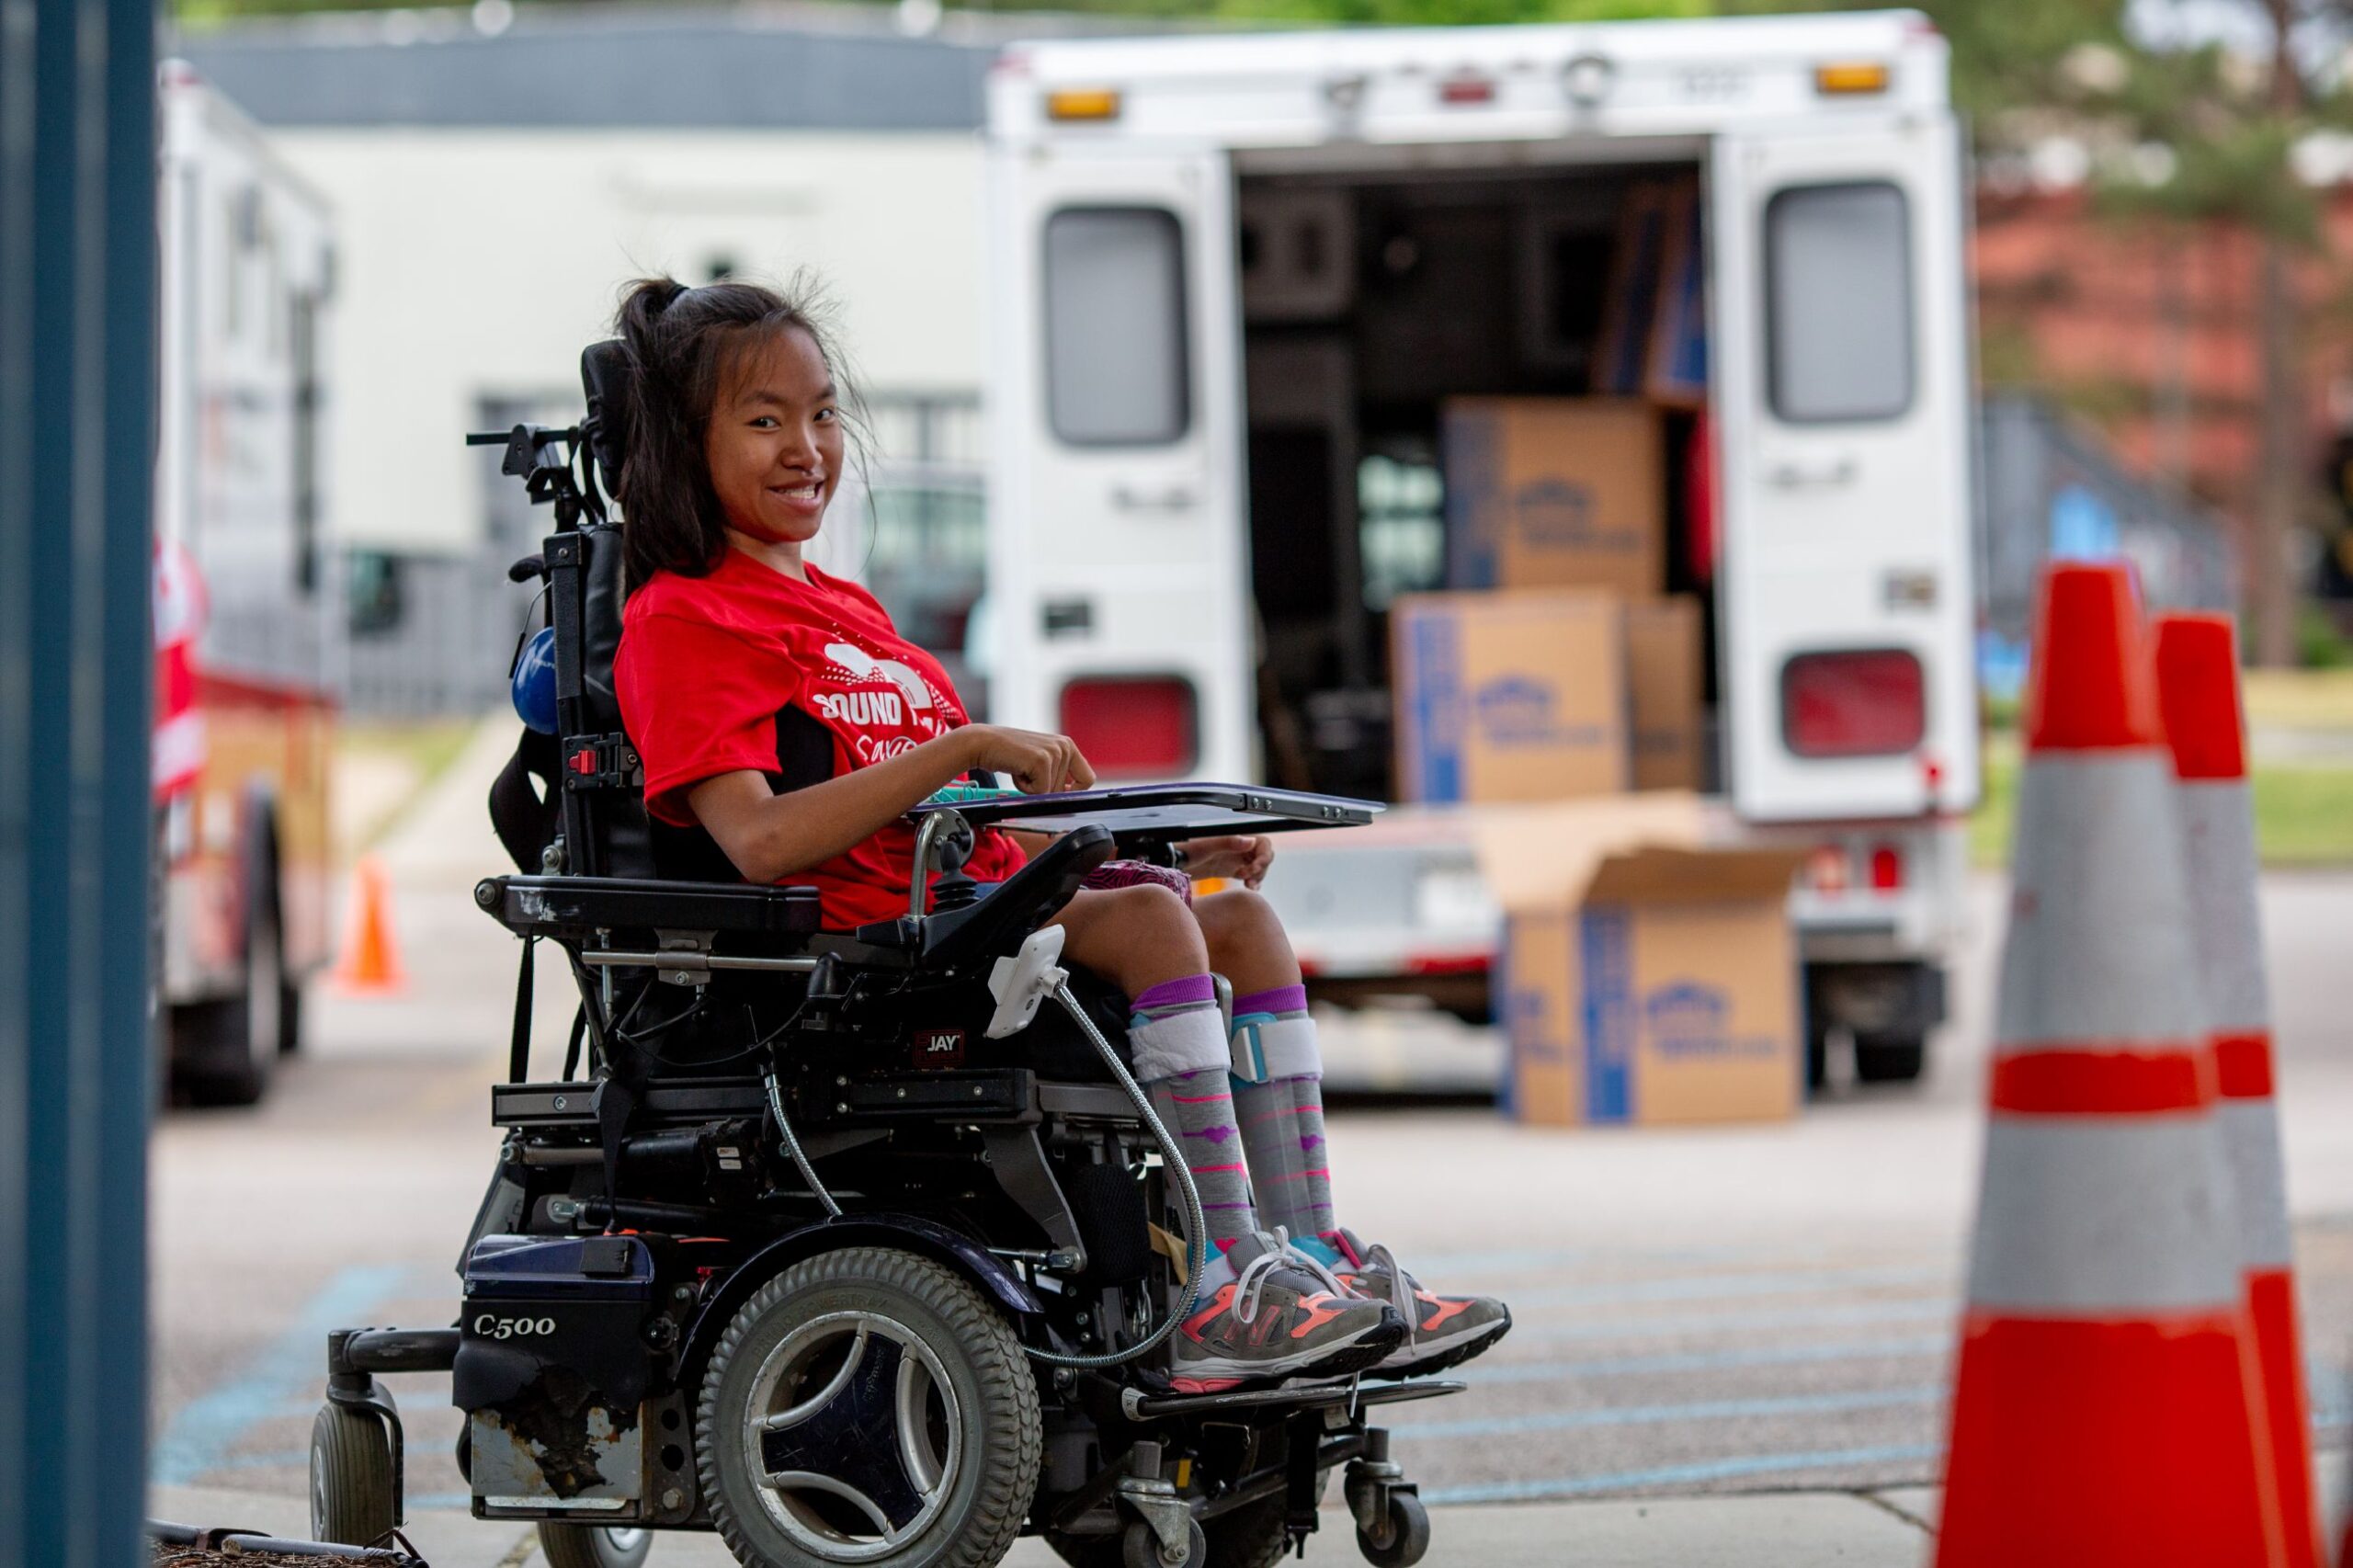 A smiling young girl in a wheelchair, wearing a red t-shirt, next to an emergency vehicle with open doors and supplies.